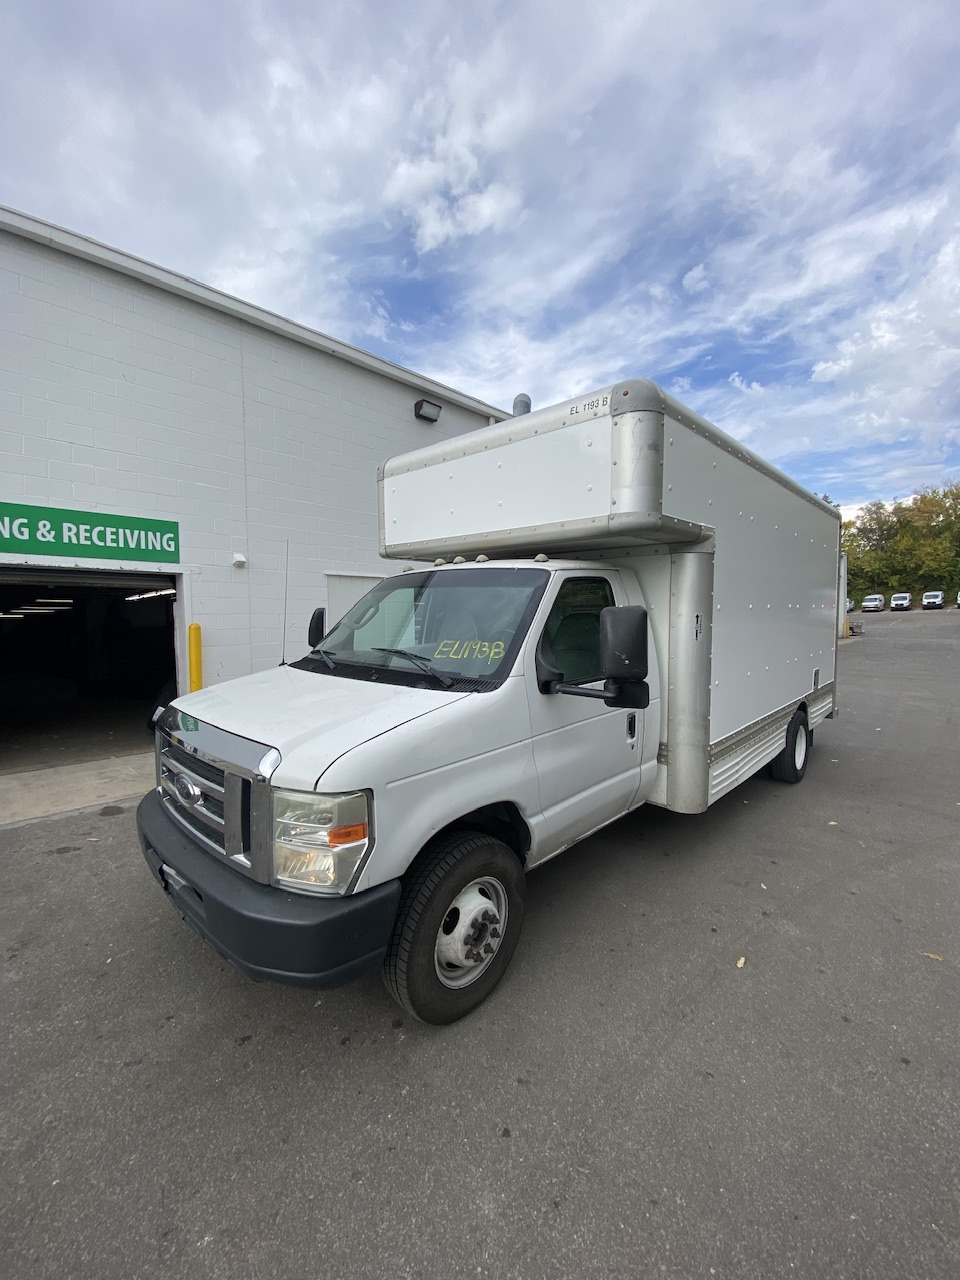 Used 2008 17 ' Box Truck for sale